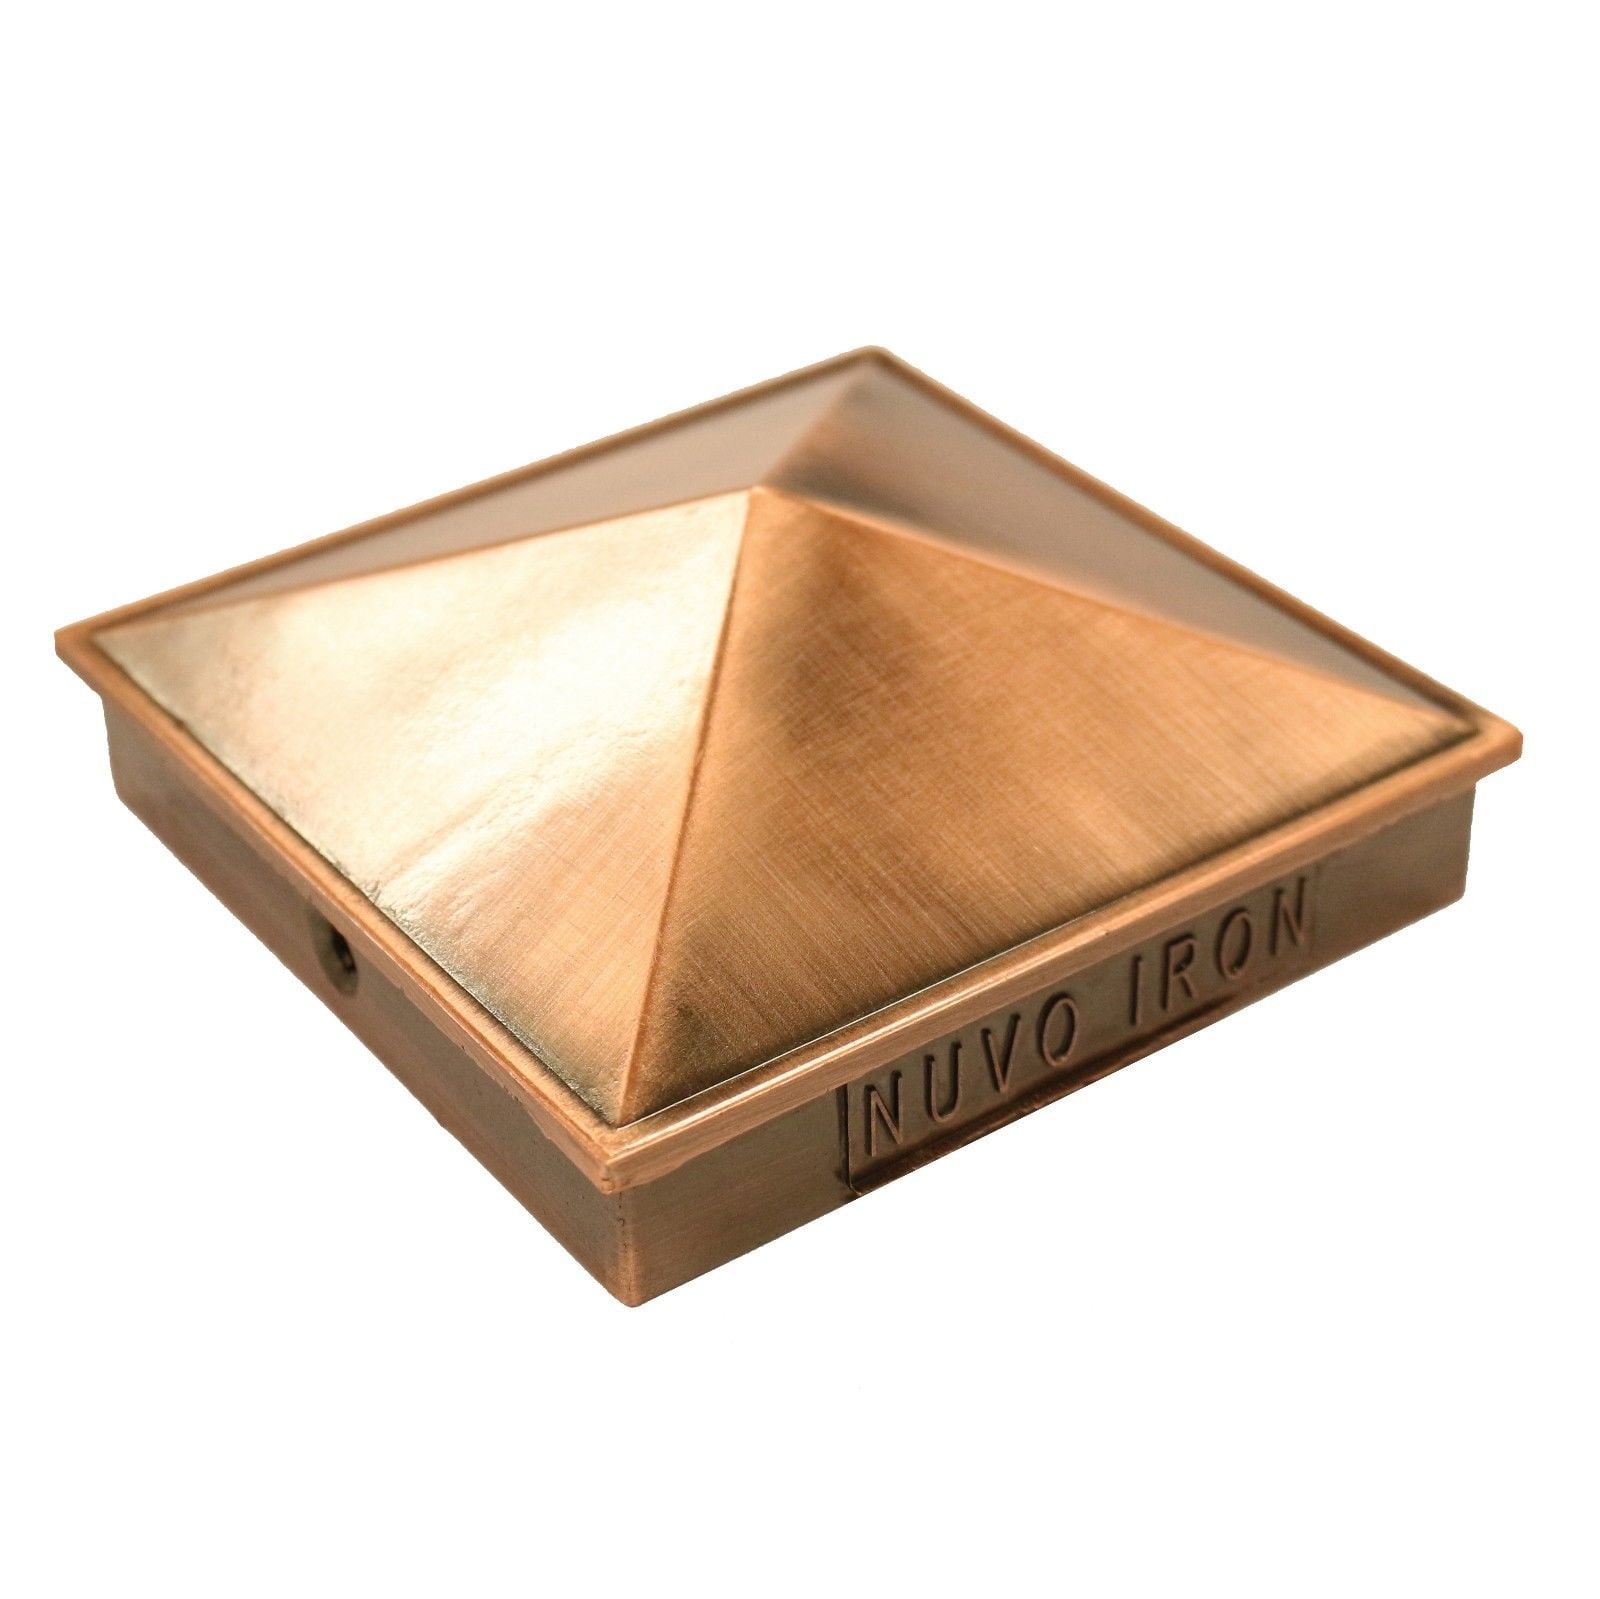 for Posts with Rounded Corners Copper Plated Nuvo Iron 3.5" x 3.5" Eazy Cap 